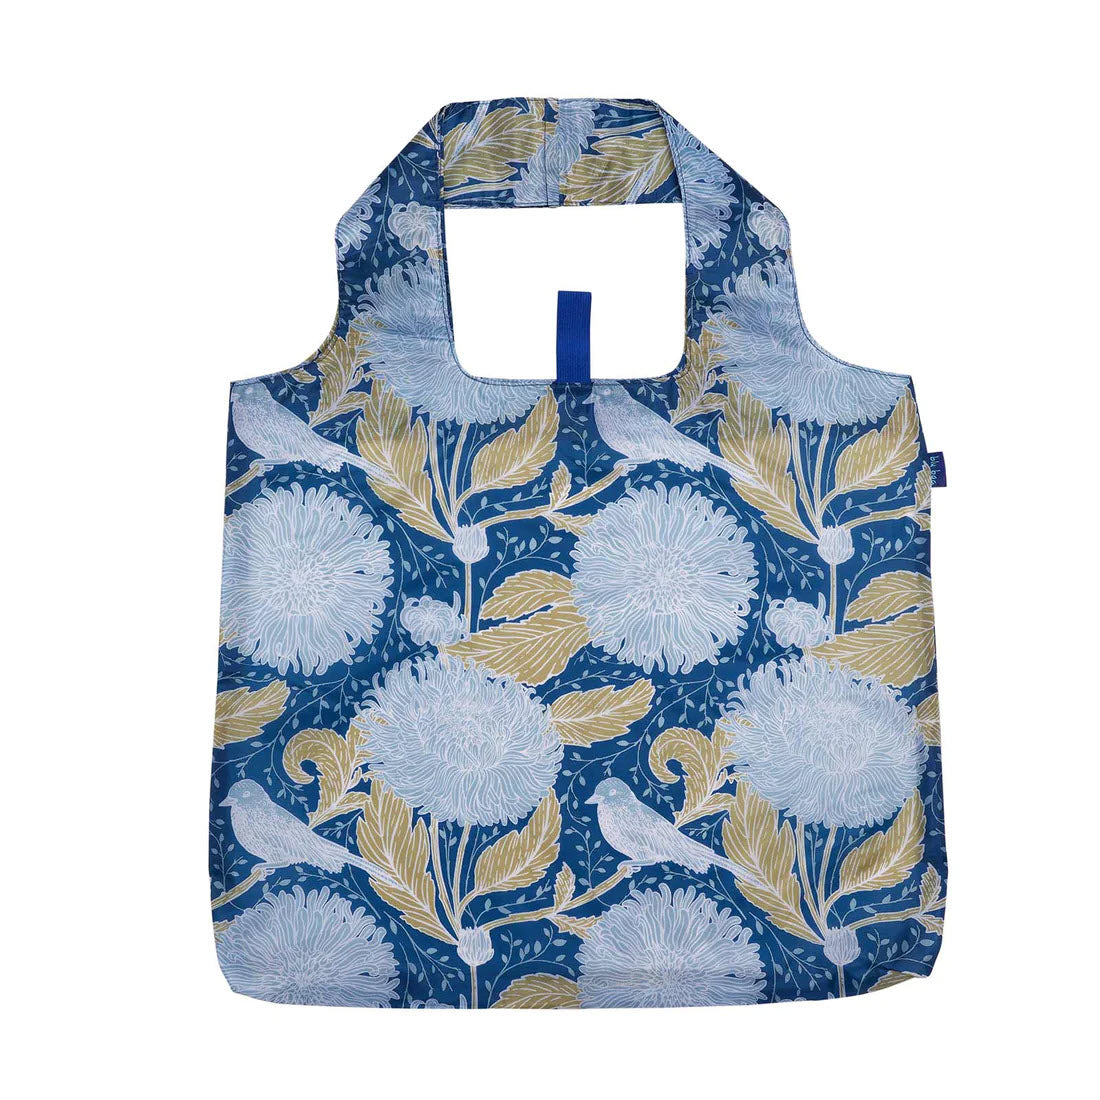 An eco-friendly BLU BAG CHRYSANTHEMUM by Rockflowerpaper featuring a blue and yellow floral design, displayed against a white background.